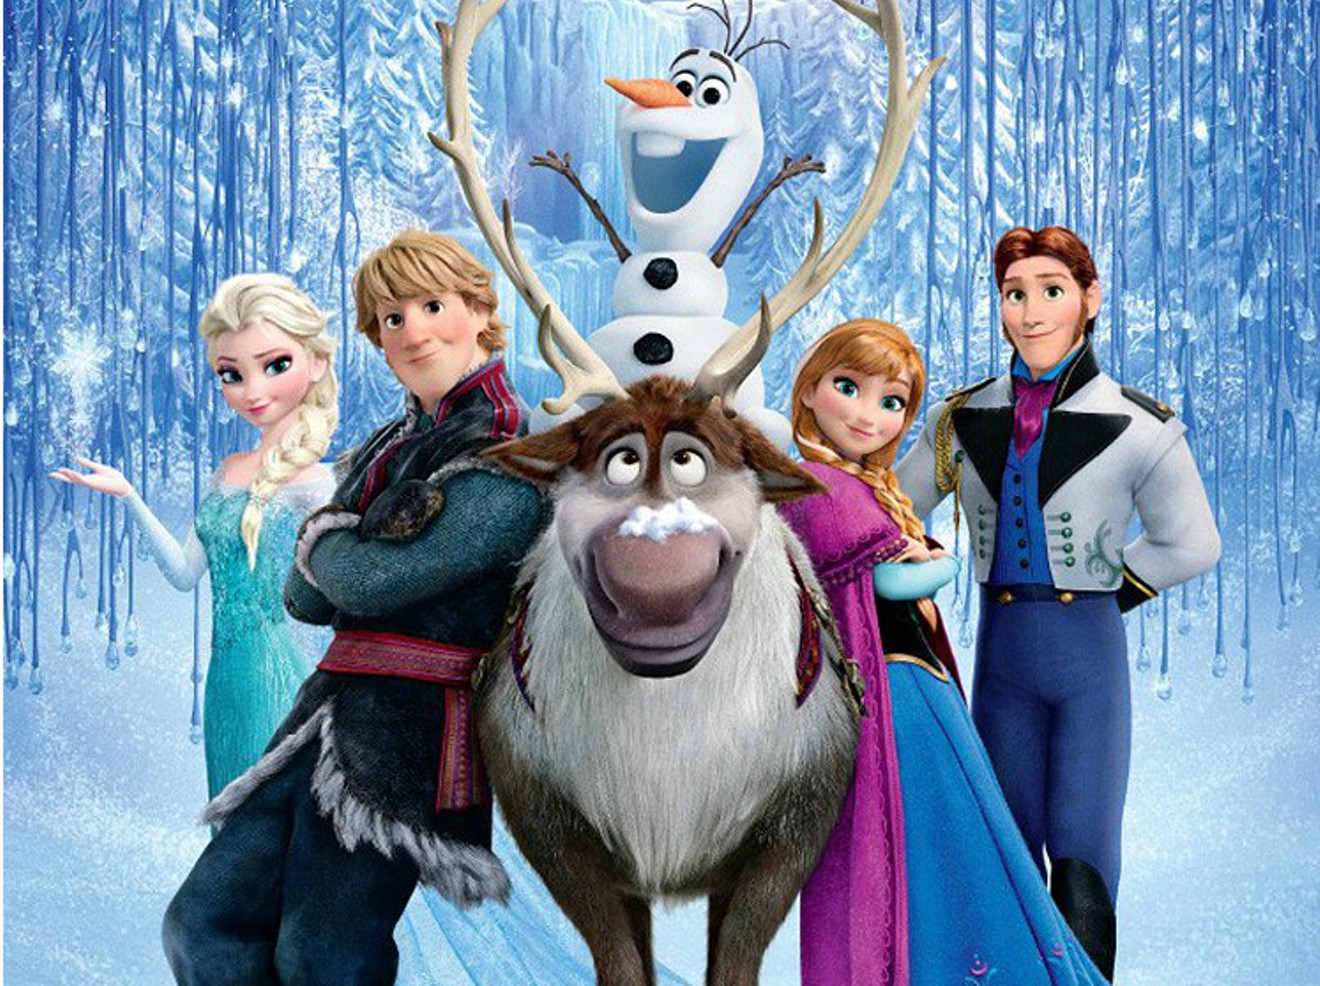 Frozen, the Broadway musical, will be staged in Denver over the summer and performed from August 17 to October 1.